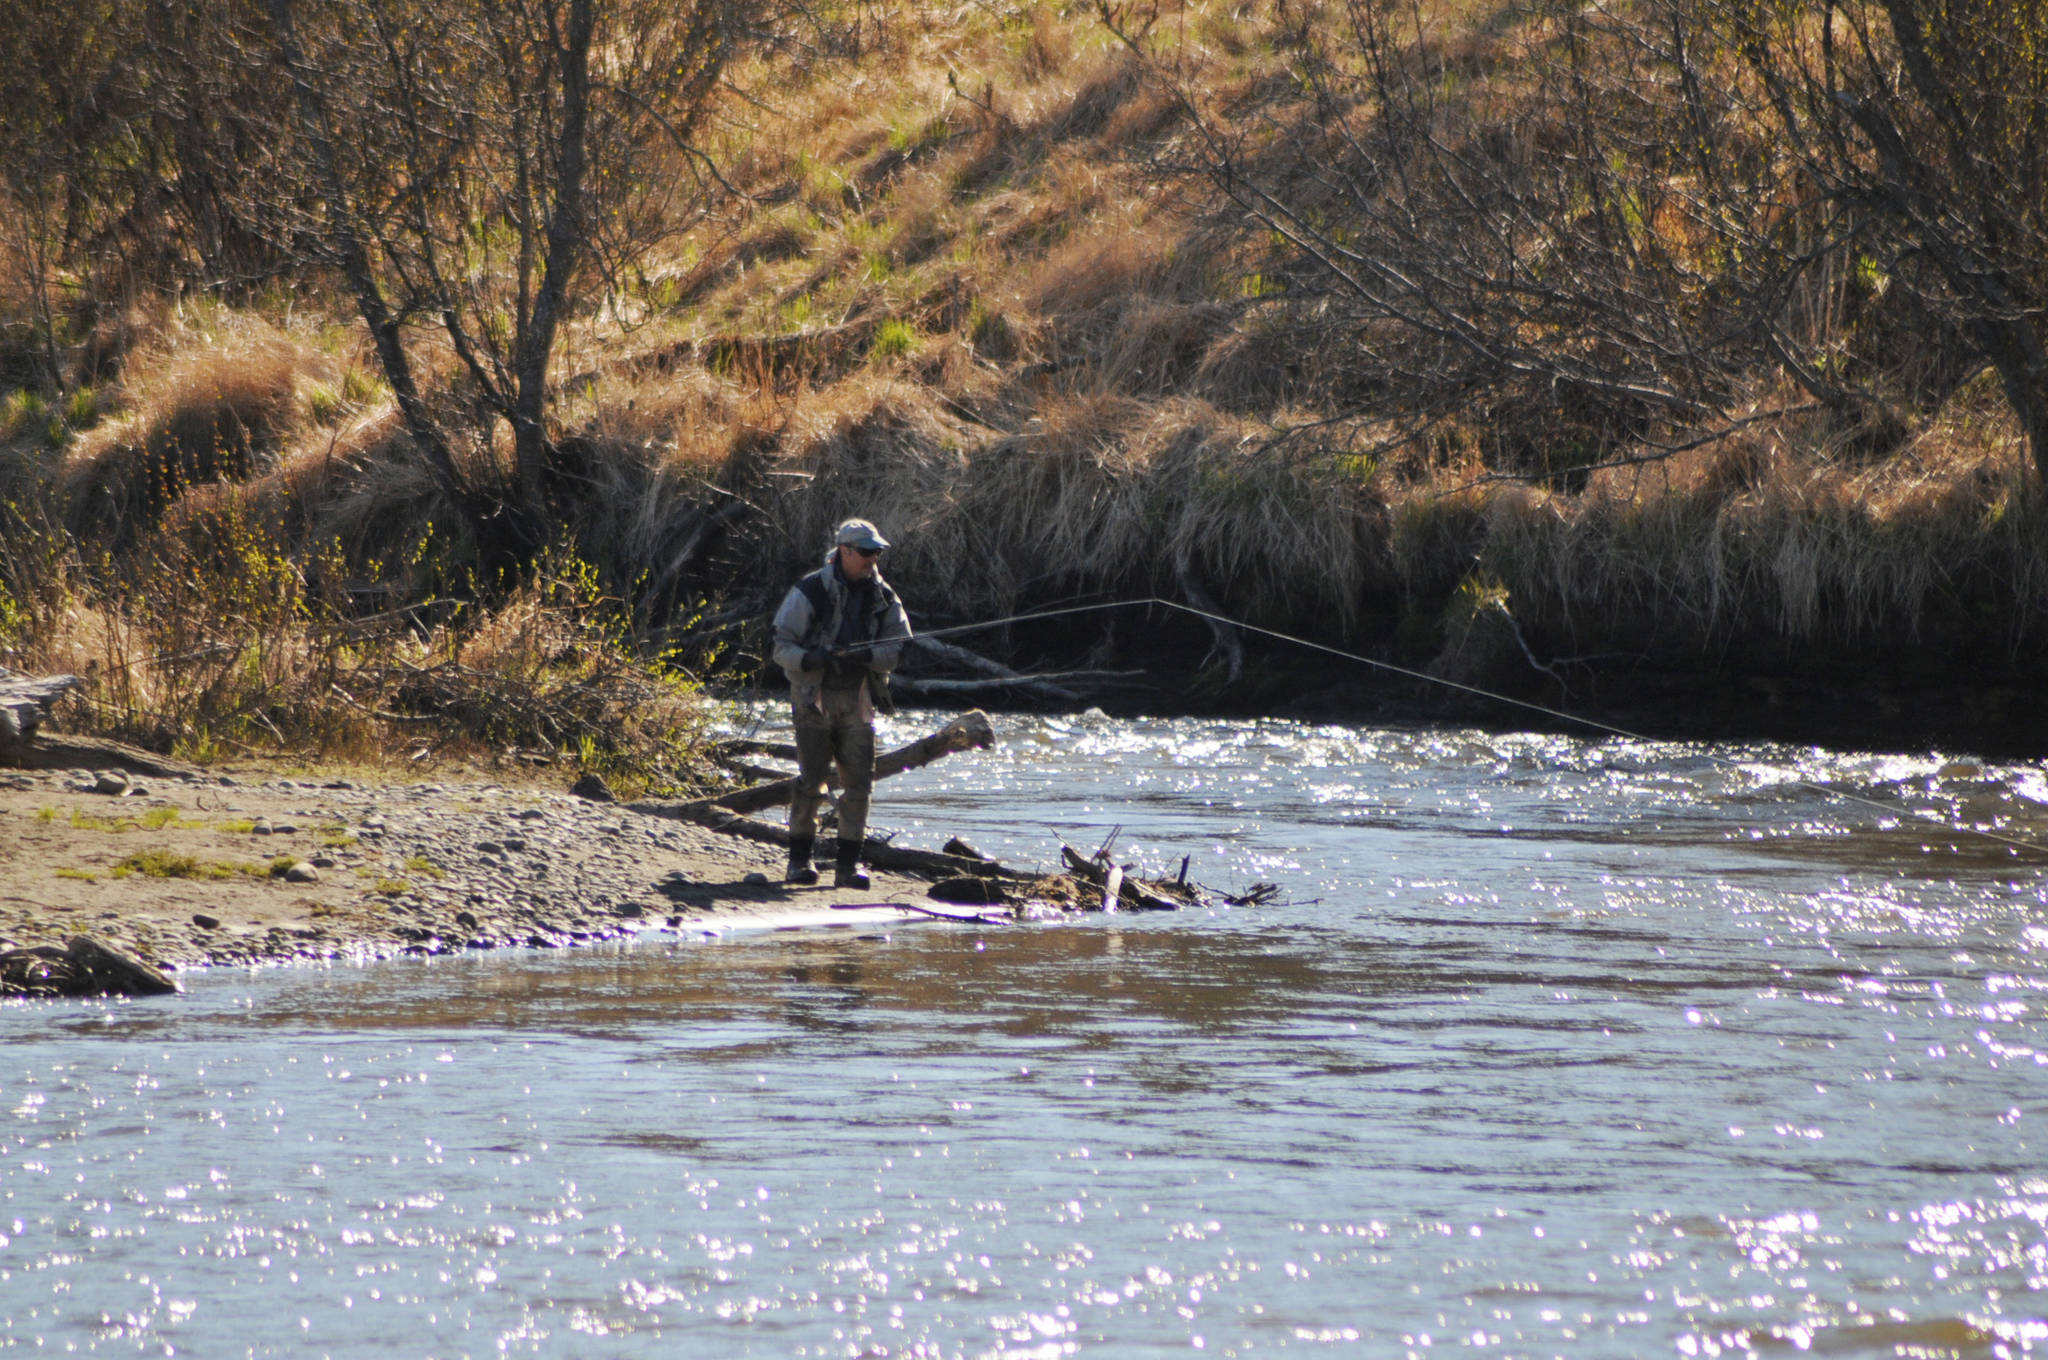 An angler tosses a line in at Deep Creek on Sunday, May 28, 2018 in Ninilchik, Alaska. Despite the perfect weather and holiday weekend, few anglers dotted the banks of the Ninlichik River and Deep Creek on Sunday, in part because the number of salmon in the rivers so far is still fairly paltry. The Alaska Department of Fish and Game classified the fishing over Memorial Day weekend as poor, in part because the water temperatures are still chilly for this time of year. (Photo by Elizabeth Earl/Peninsula Clarion)